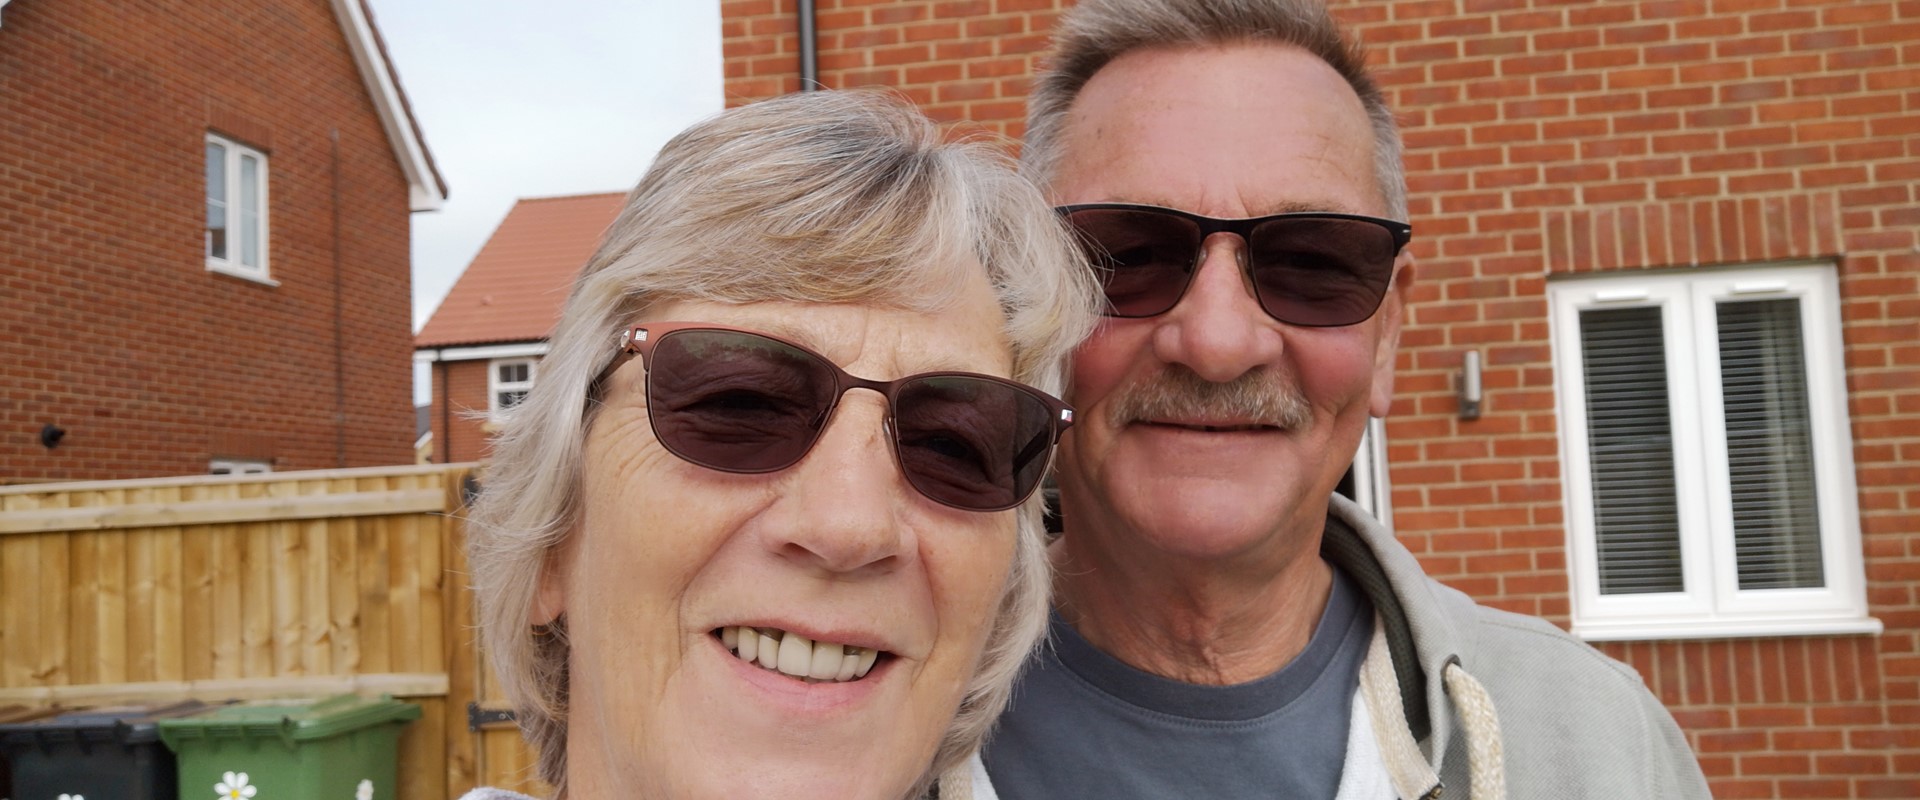 Couple find their dream home at Orbit Homes’ Mill View in Dereham thanks to Shared Ownership